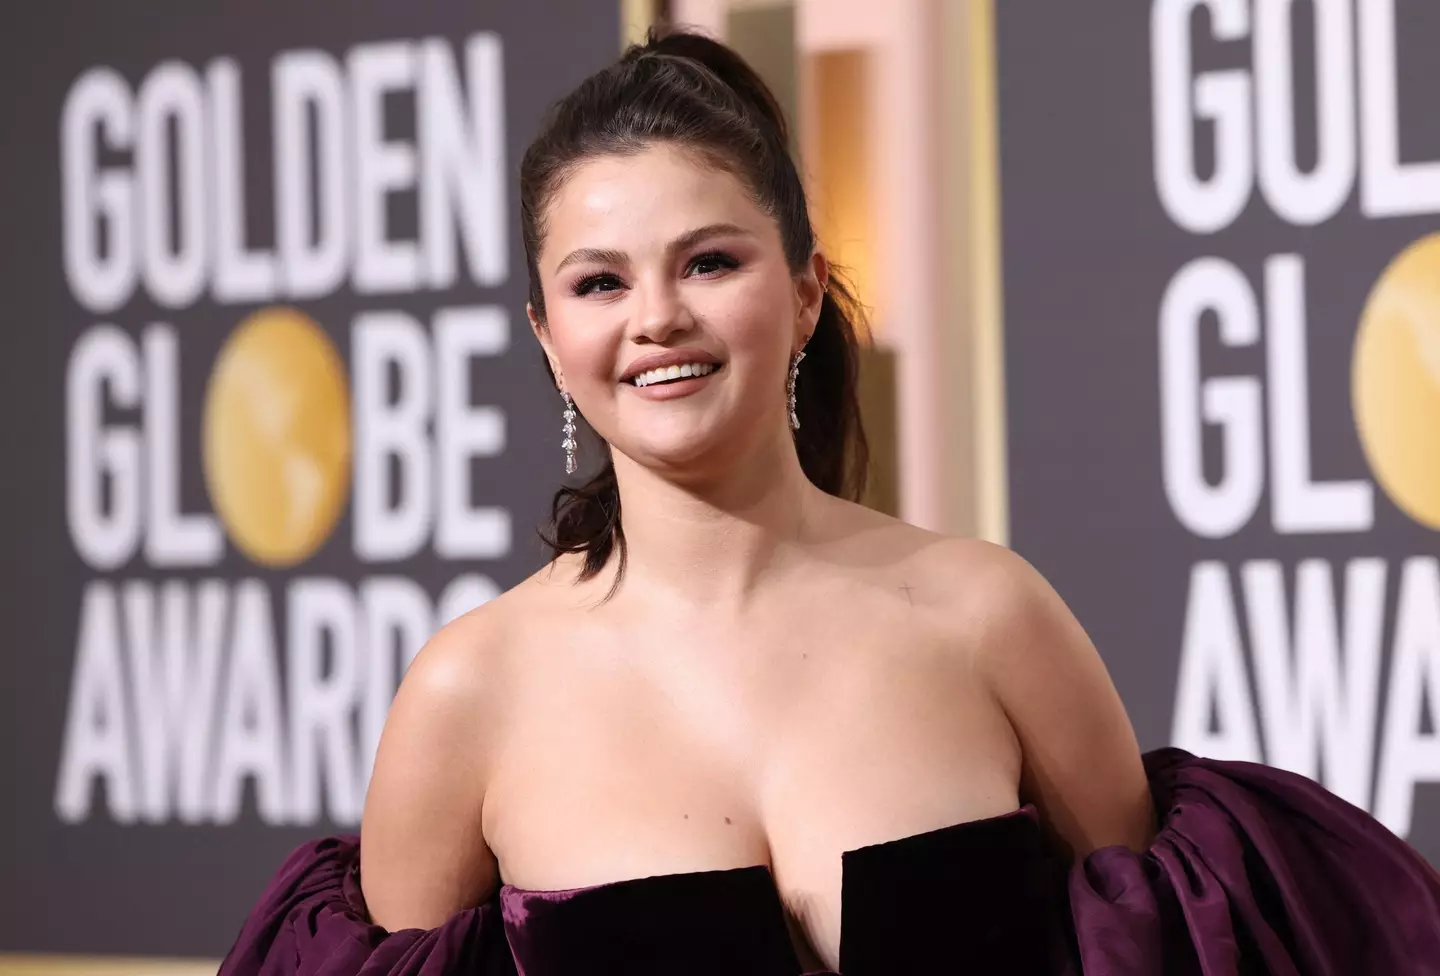 It's worth noting that Selena Gomez has been steering clear of the drama, and definitely didn't ask for these comments.